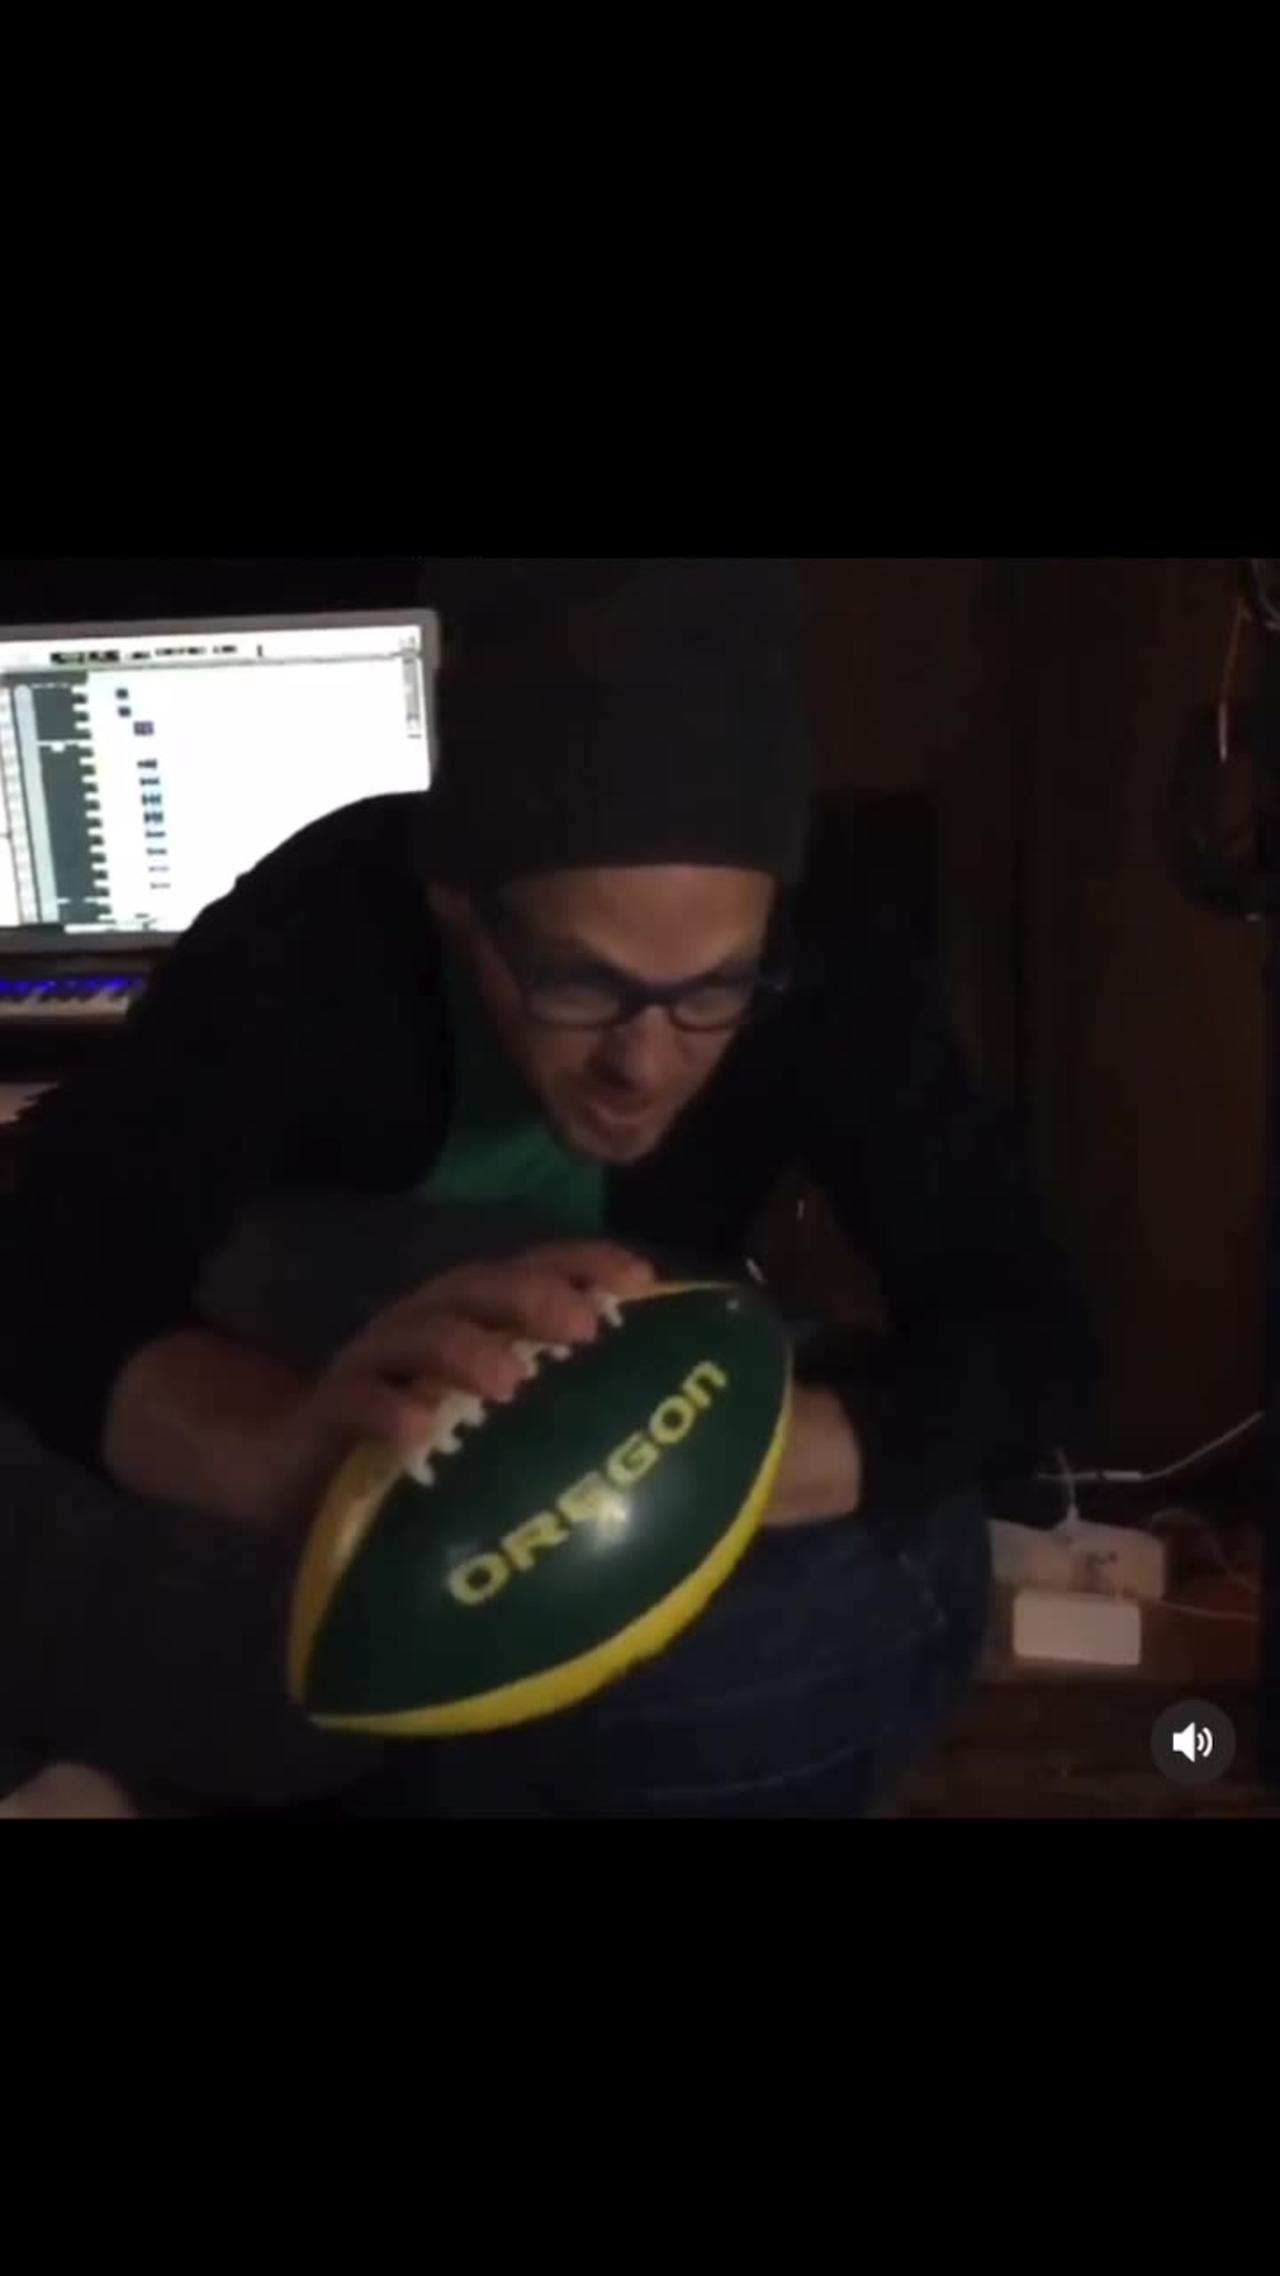 TobyMac playing some football in the Studio!